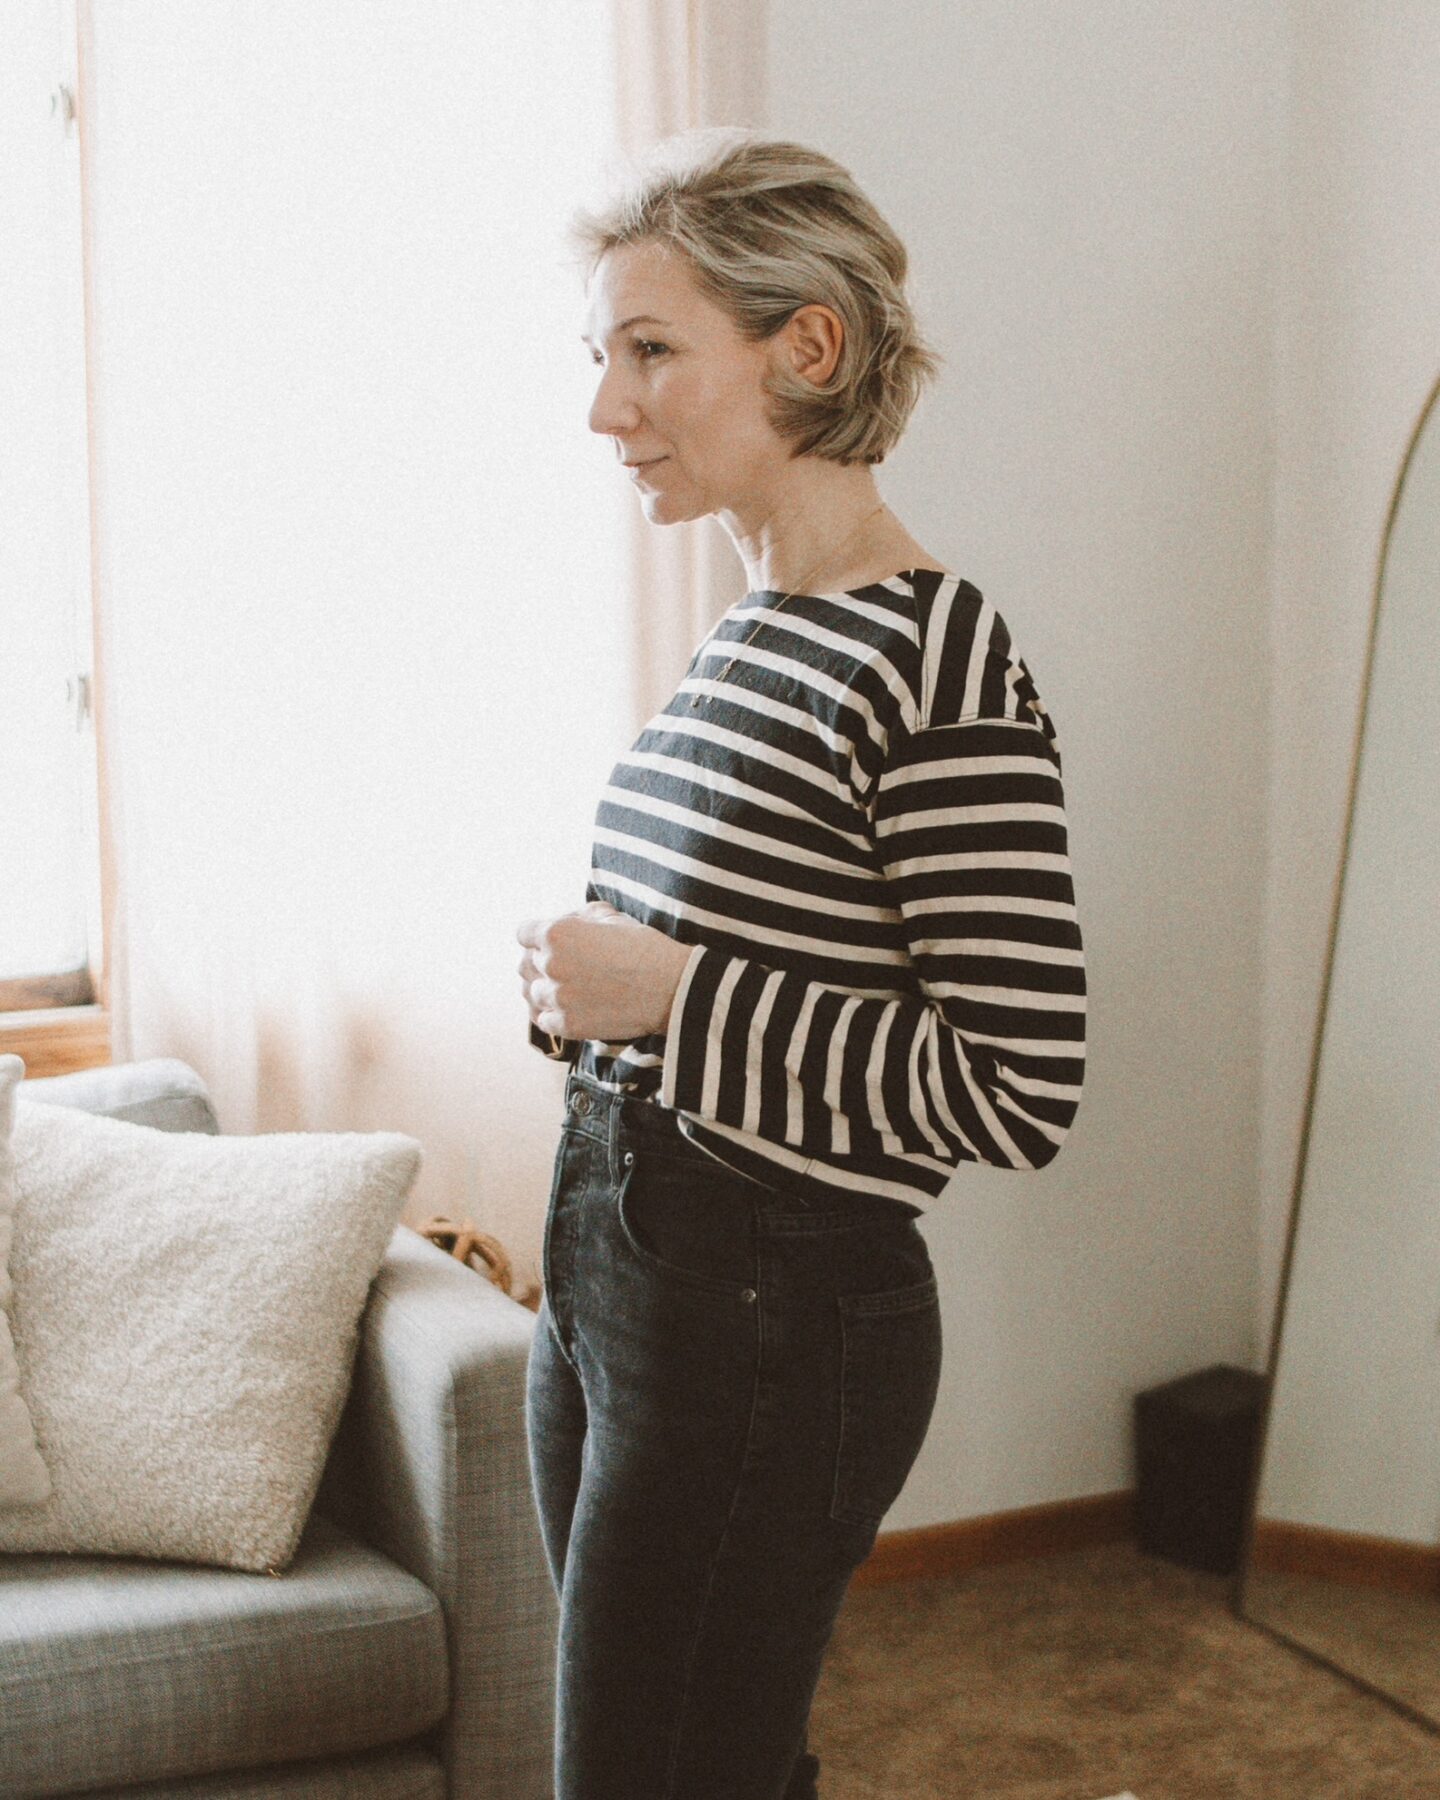 Karin Emily stands in front of her living room couch and standing mirror in her Agolde Freya jeans and Everlane breton stripe tee